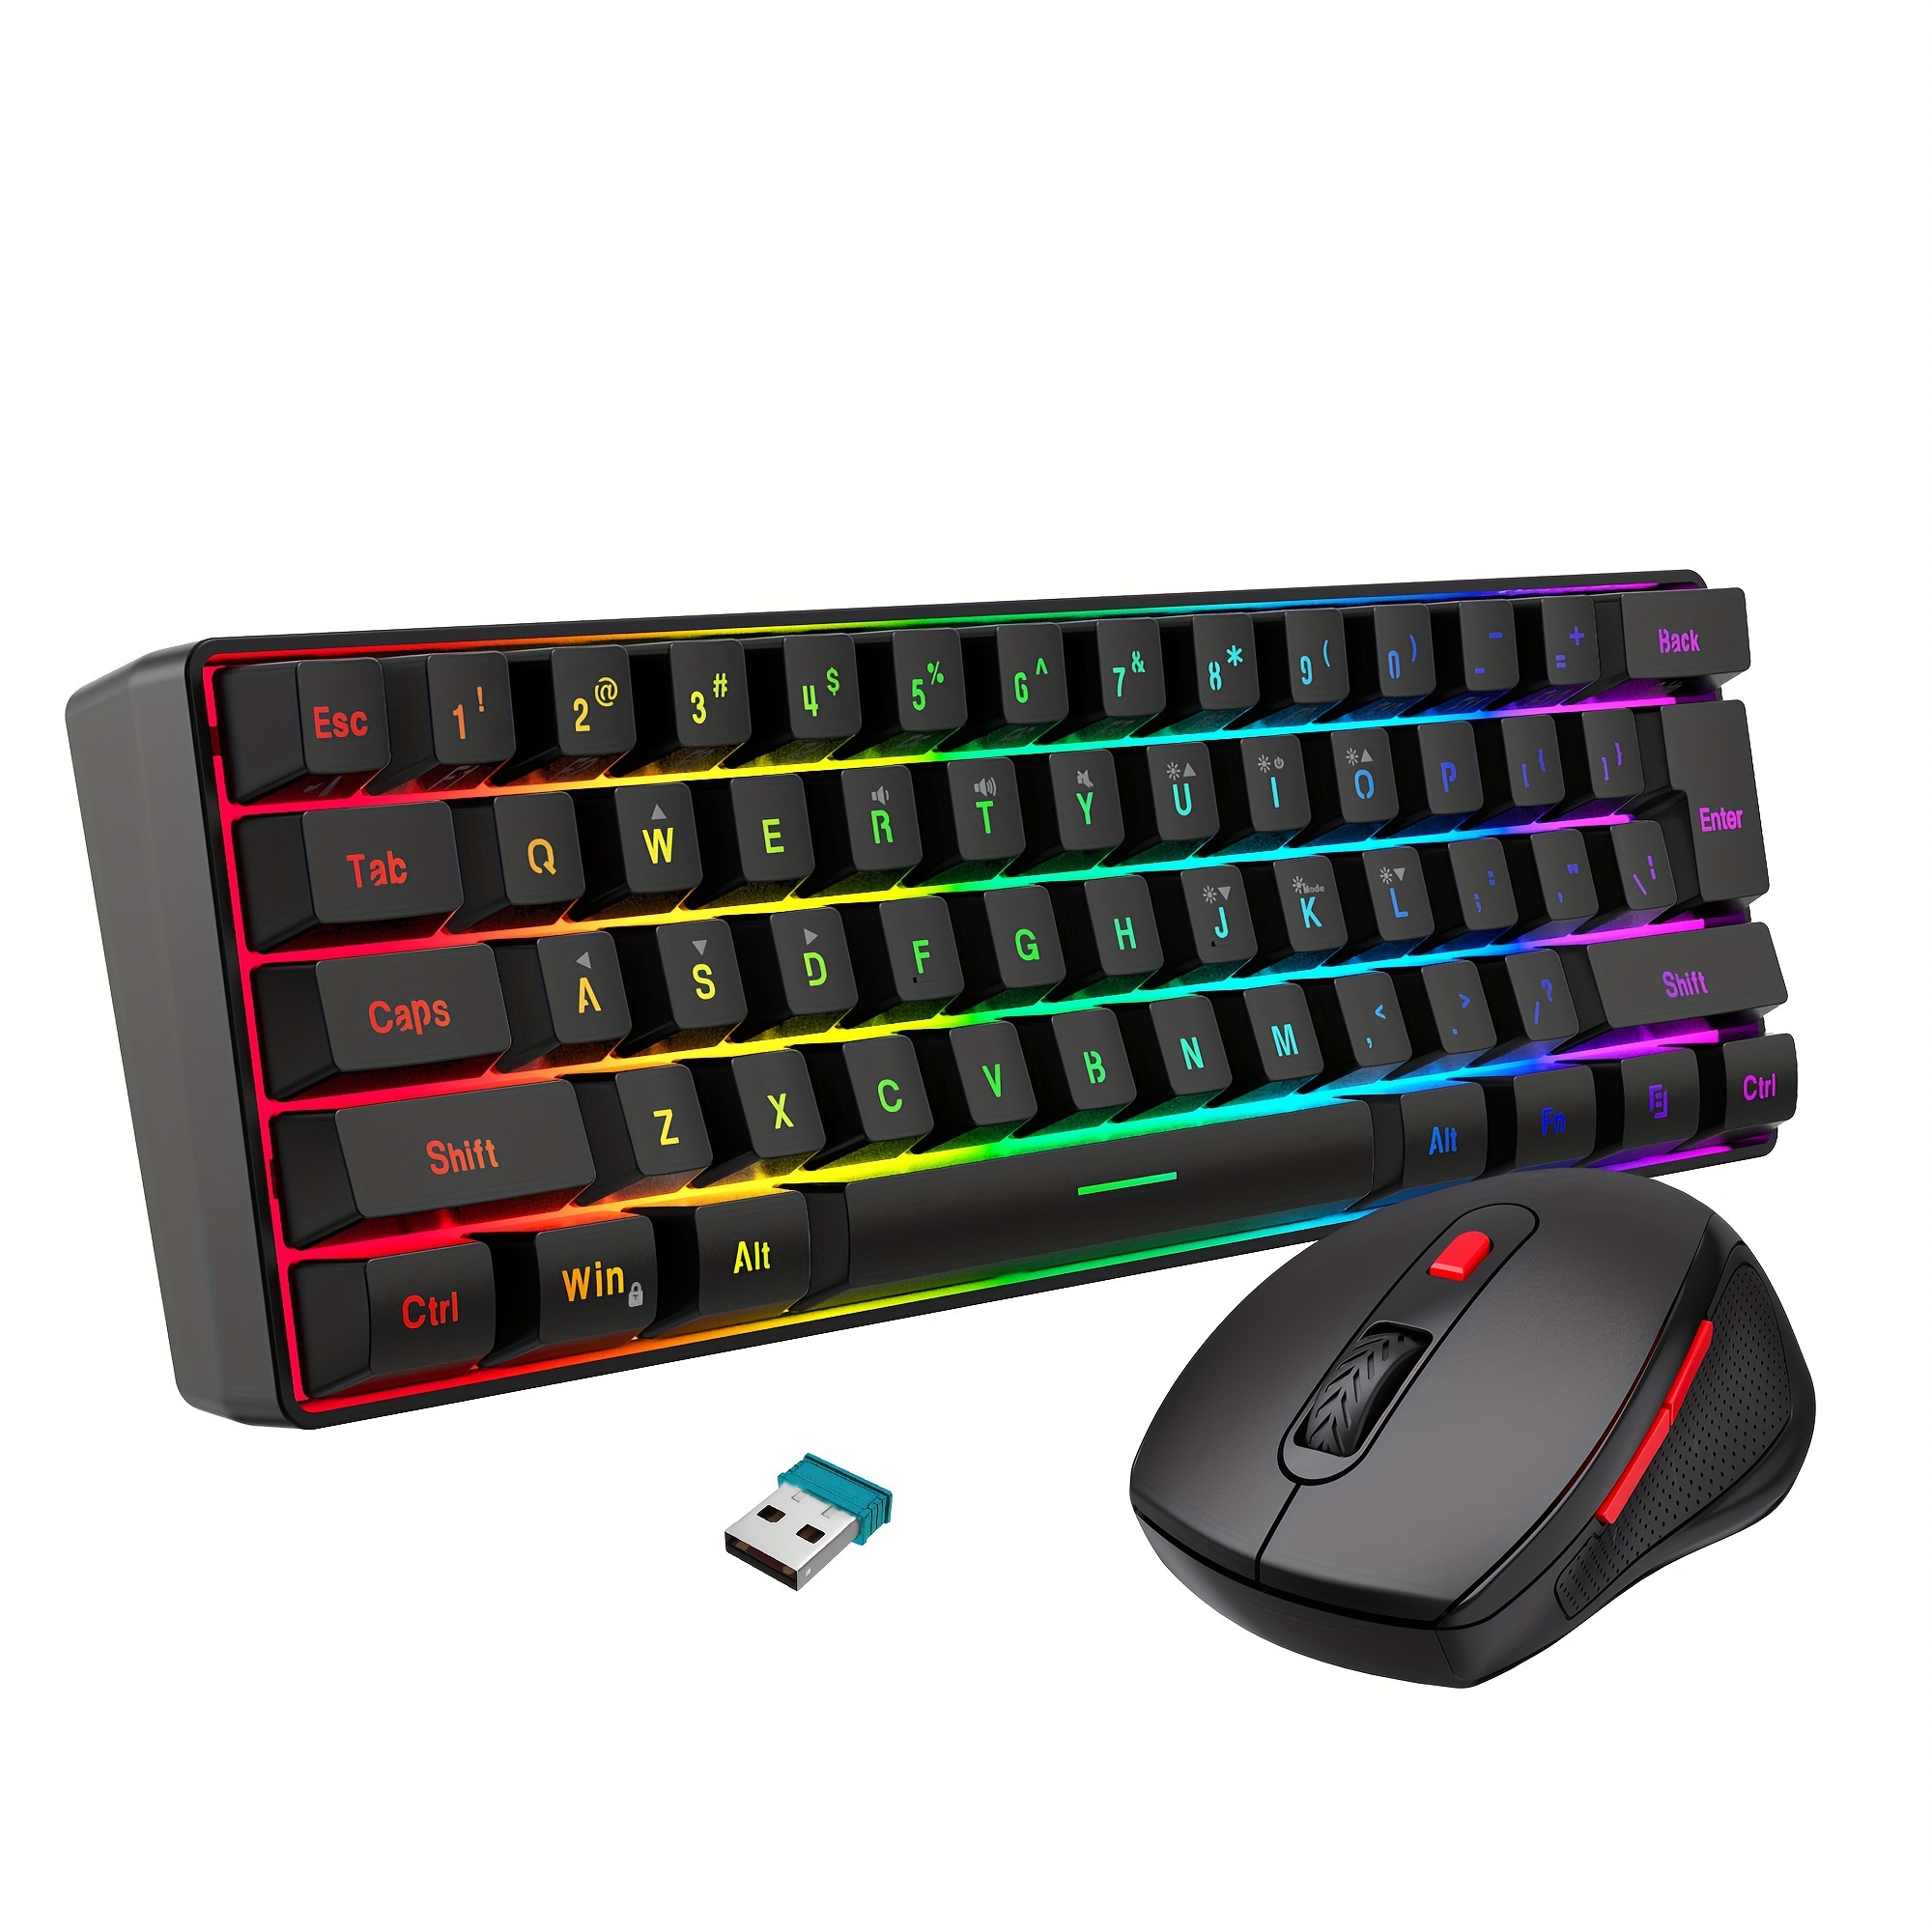 

Snpurdiri 60% Wireless Game Keyboard Rgb Lighting Keyboard And 2.4 G Wireless Mouse Combination, Including 2.4 G Mini Mechanical Touch Keyboard, Ergonomic Design Rechargeable